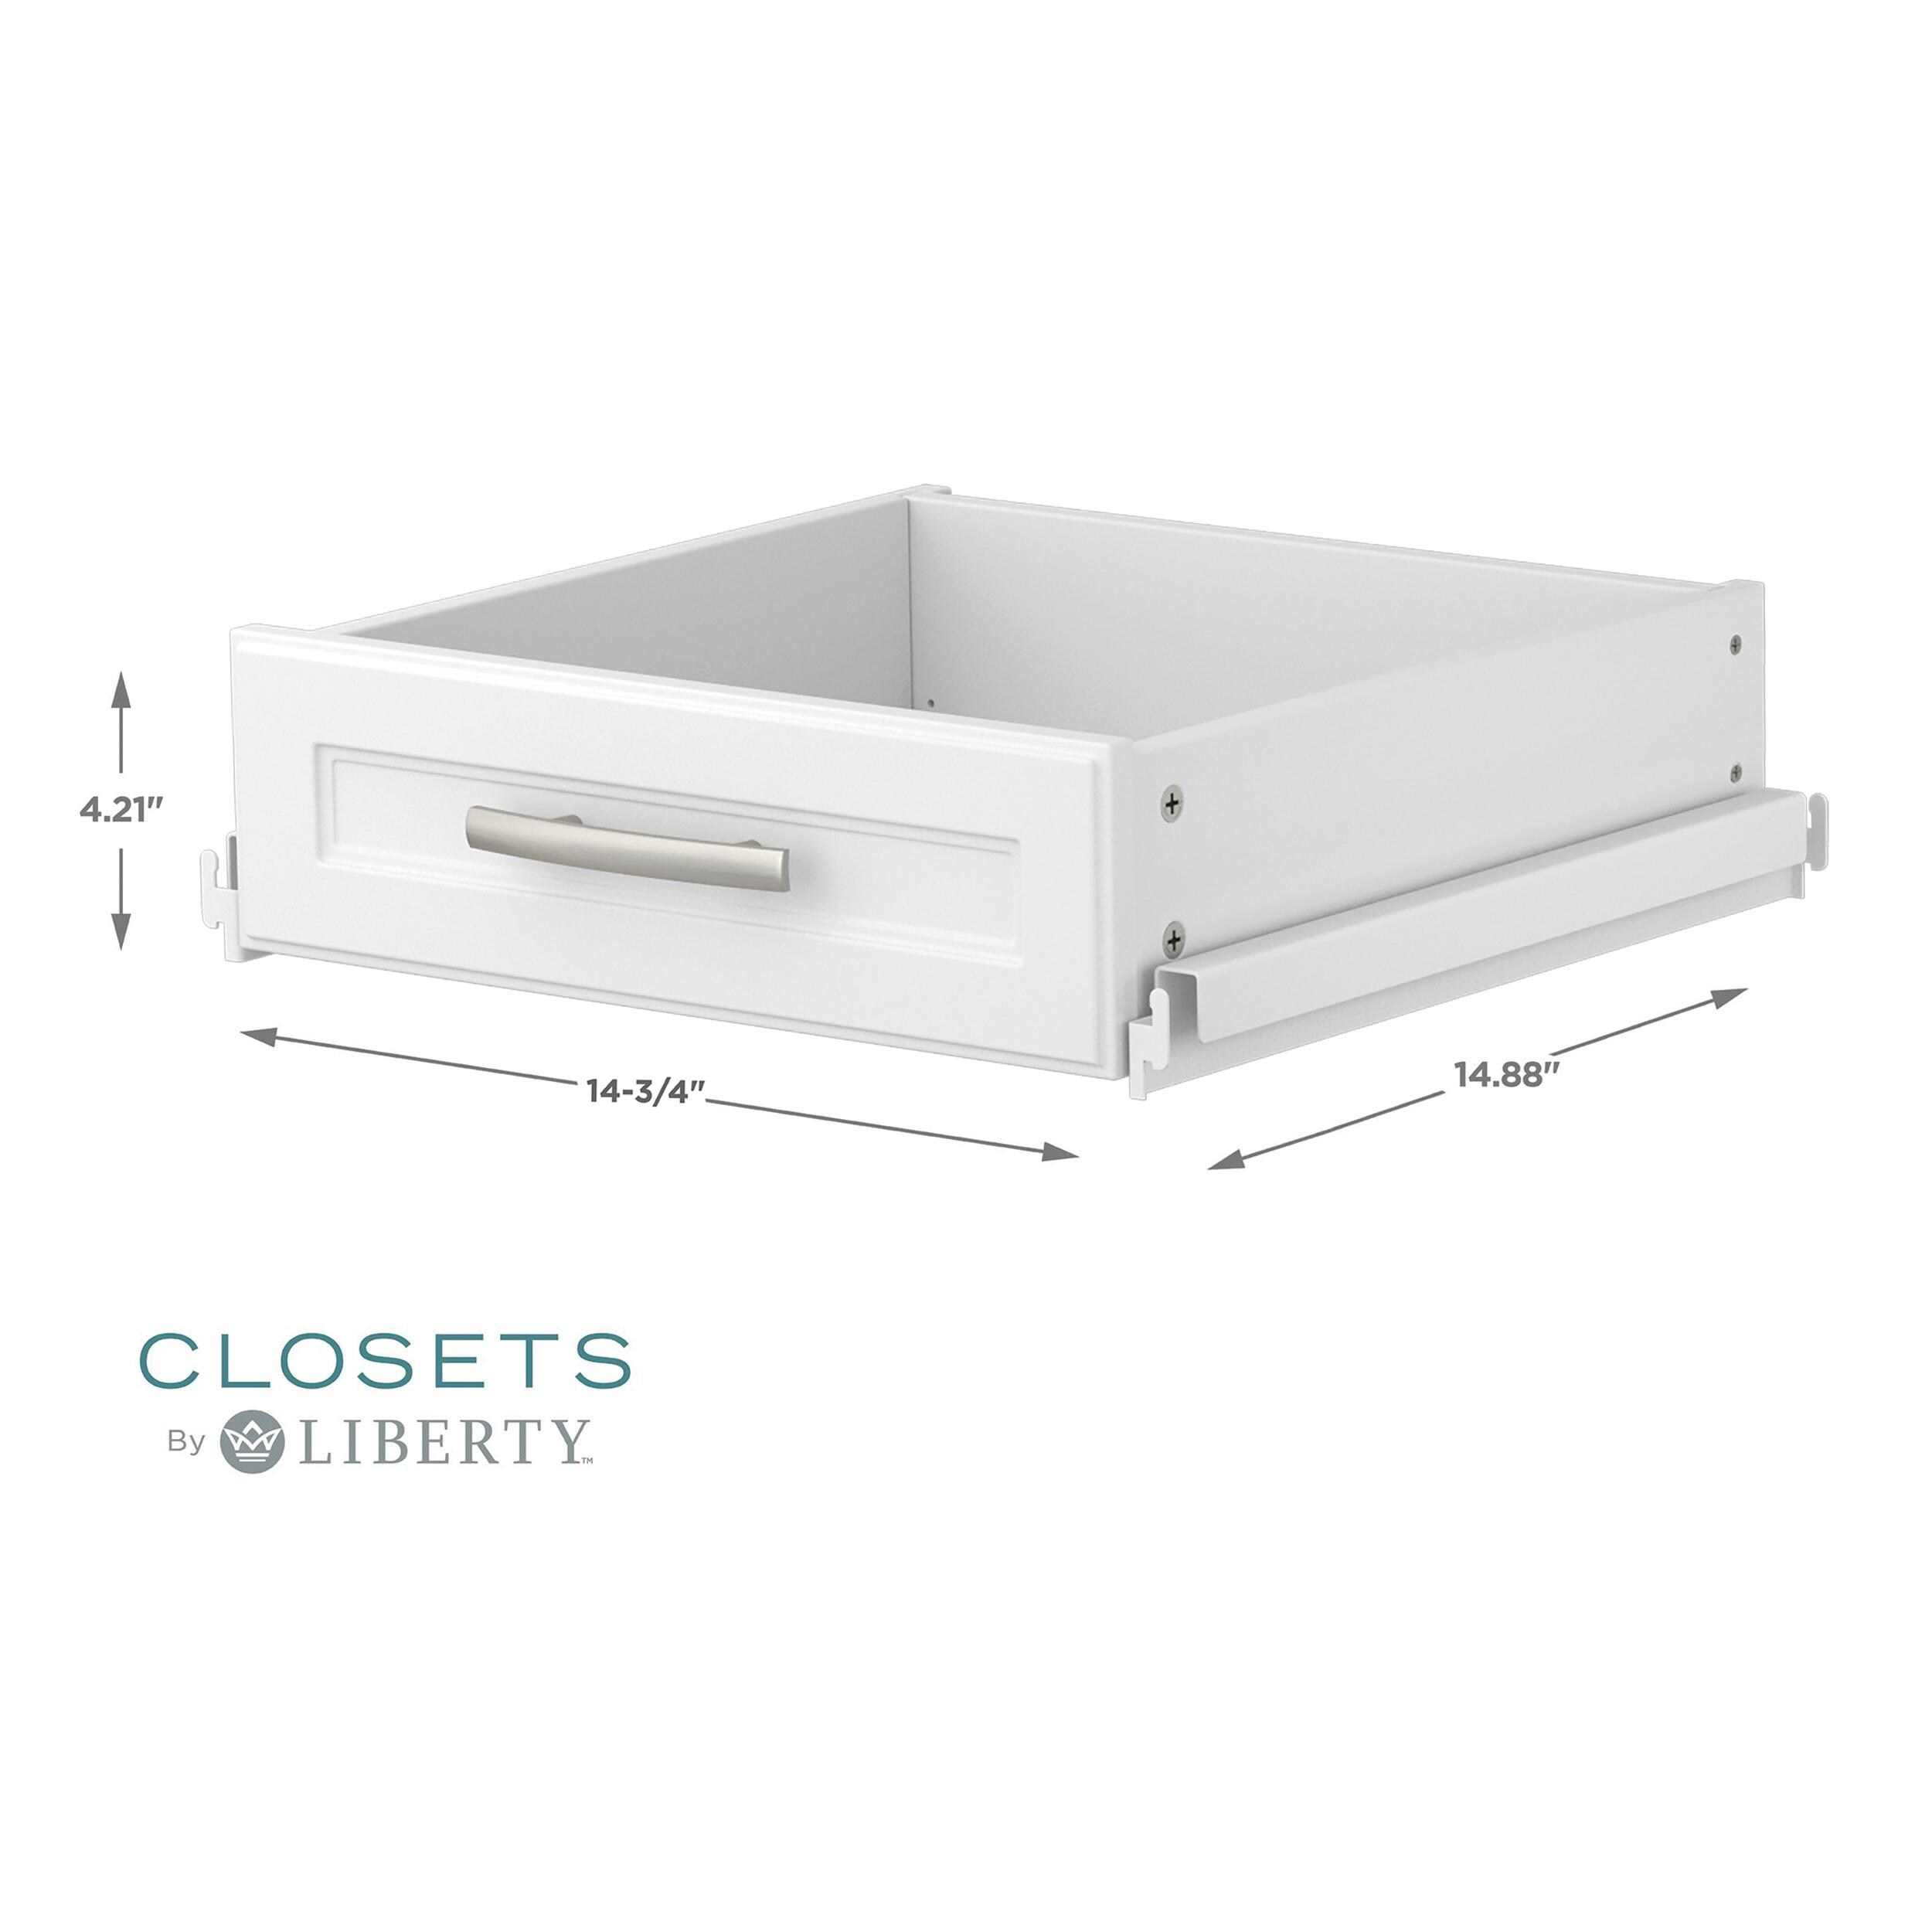 Closets by Liberty 18-in x 0.89-in x 16.75-in Classic White Drawer Unit ...